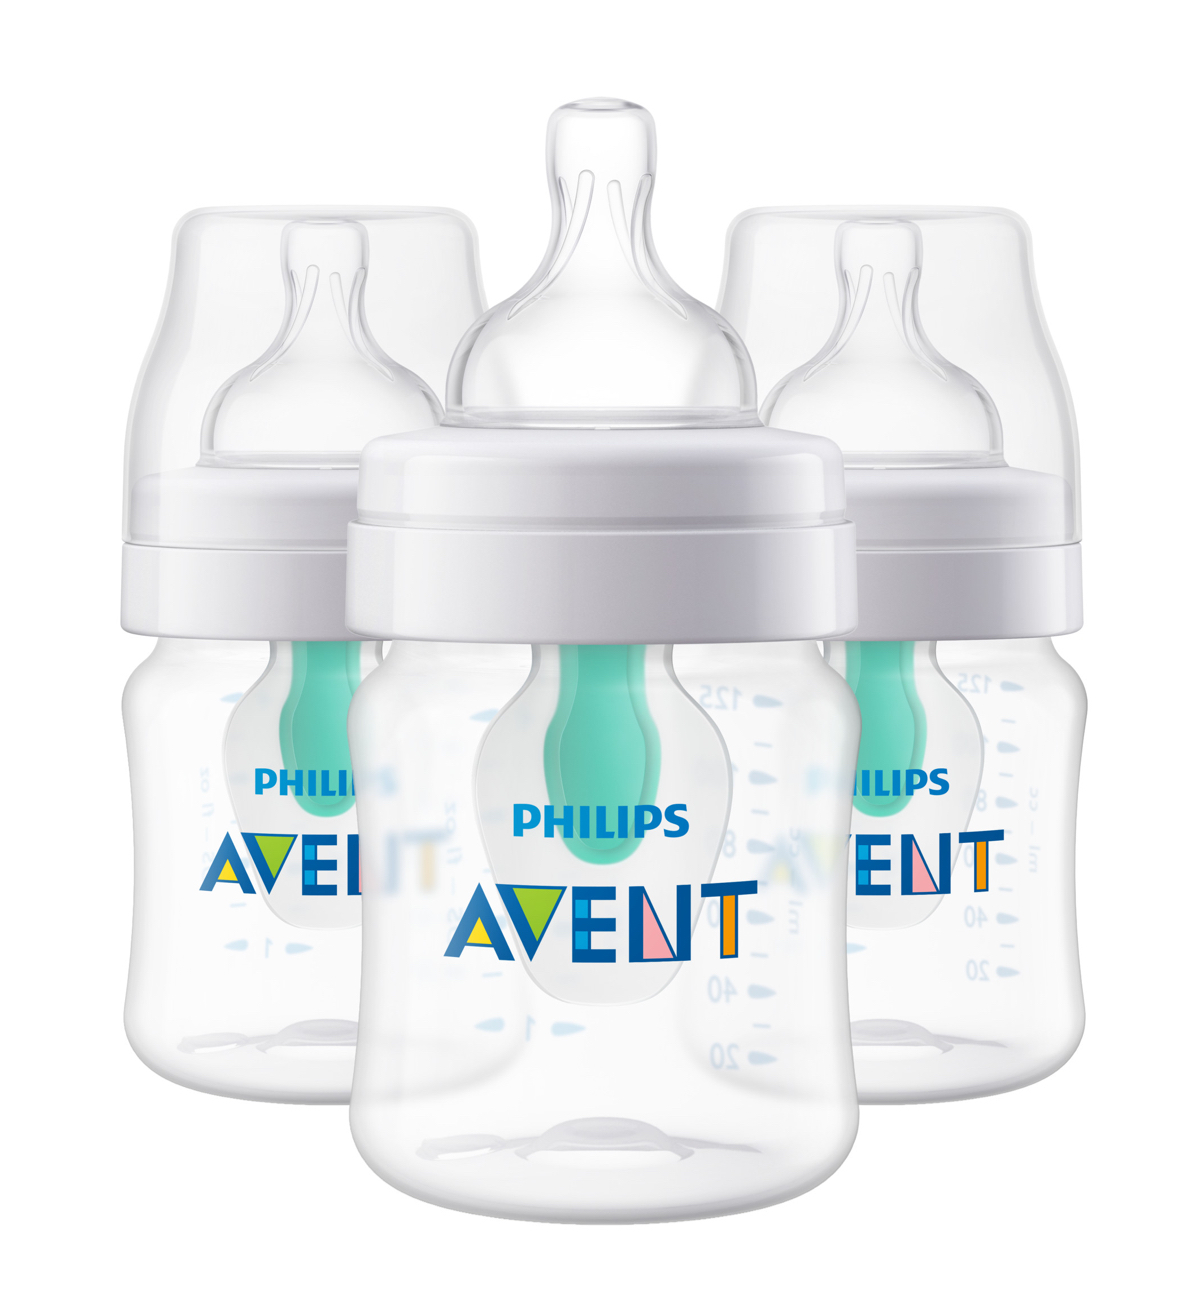 Philips Avent Anti-colic Bottle with AirFree vent 4oz 3pk, SCF400/34  - $32.95